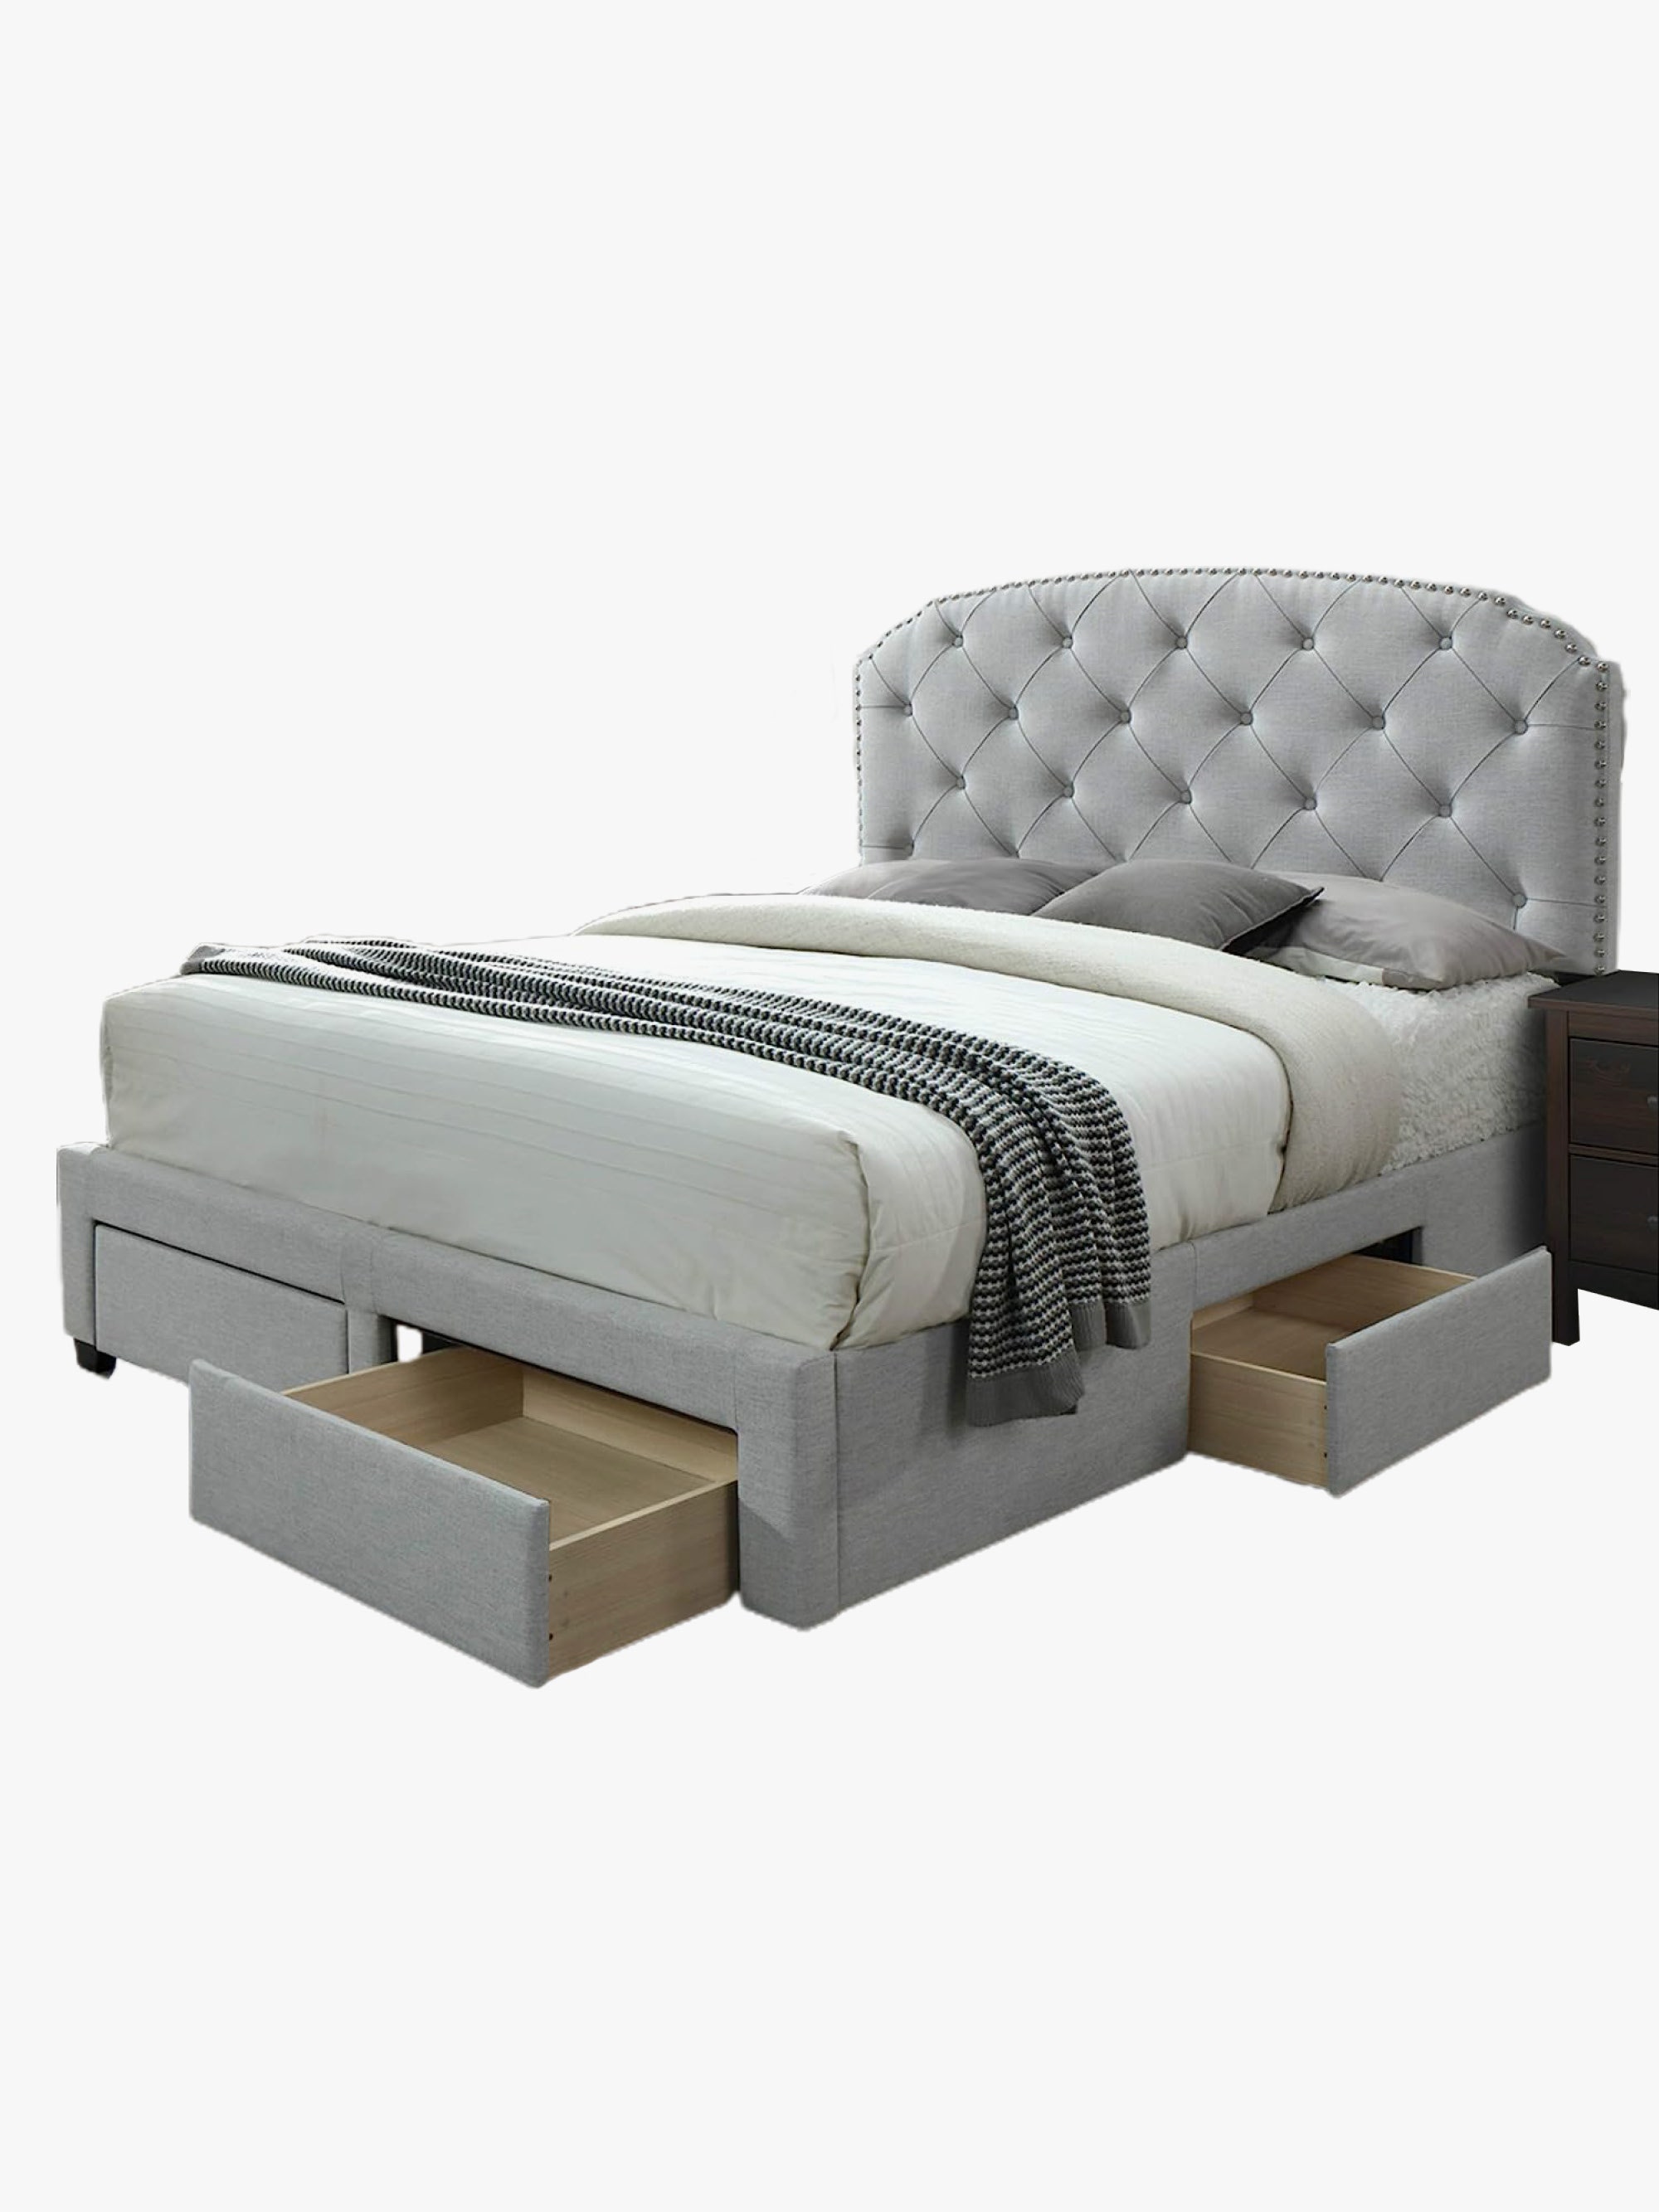 <p>A button-tufted headboard with a nailhead trim gives this best-selling storage bed an extra dose of texture. Four built-in storage drawers offer up a mighty amount of space without weighing down the style of this fabric-covered bed. Top it with a supportive <a href="https://www.architecturaldigest.com/story/best-mattress-brands?mbid=synd_msn_rss&utm_source=msn&utm_medium=syndication">mattress</a>, fluffy <a href="https://www.architecturaldigest.com/story/best-bed-pillows?mbid=synd_msn_rss&utm_source=msn&utm_medium=syndication">pillow</a>, and one of the <a href="https://www.architecturaldigest.com/story/best-comforters?mbid=synd_msn_rss&utm_source=msn&utm_medium=syndication">best comforters</a> to create the sleep setup of your dreams.</p> <ul> <li><strong>Sizes available:</strong> Twin, full, queen, king</li> <li><strong>Colors available:</strong> Platinum, beige, blue, charcoal</li> <li><strong>Storage type:</strong> Four underbed, pullout storage drawers</li> <li><strong>Materials:</strong> Solid wood</li> <li><strong>Weight capacity:</strong> 500 pounds</li> </ul> $270, Amazon. <a href="https://www.amazon.com/DG-Casa-Upholstered-Nailhead-Headboard/dp/B07F5P281F">Get it now!</a><p>Sign up for our newsletter to get the latest in design, decorating, celebrity style, shopping, and more.</p><a href="https://www.architecturaldigest.com/newsletter/subscribe?sourceCode=msnsend">Sign Up Now</a>